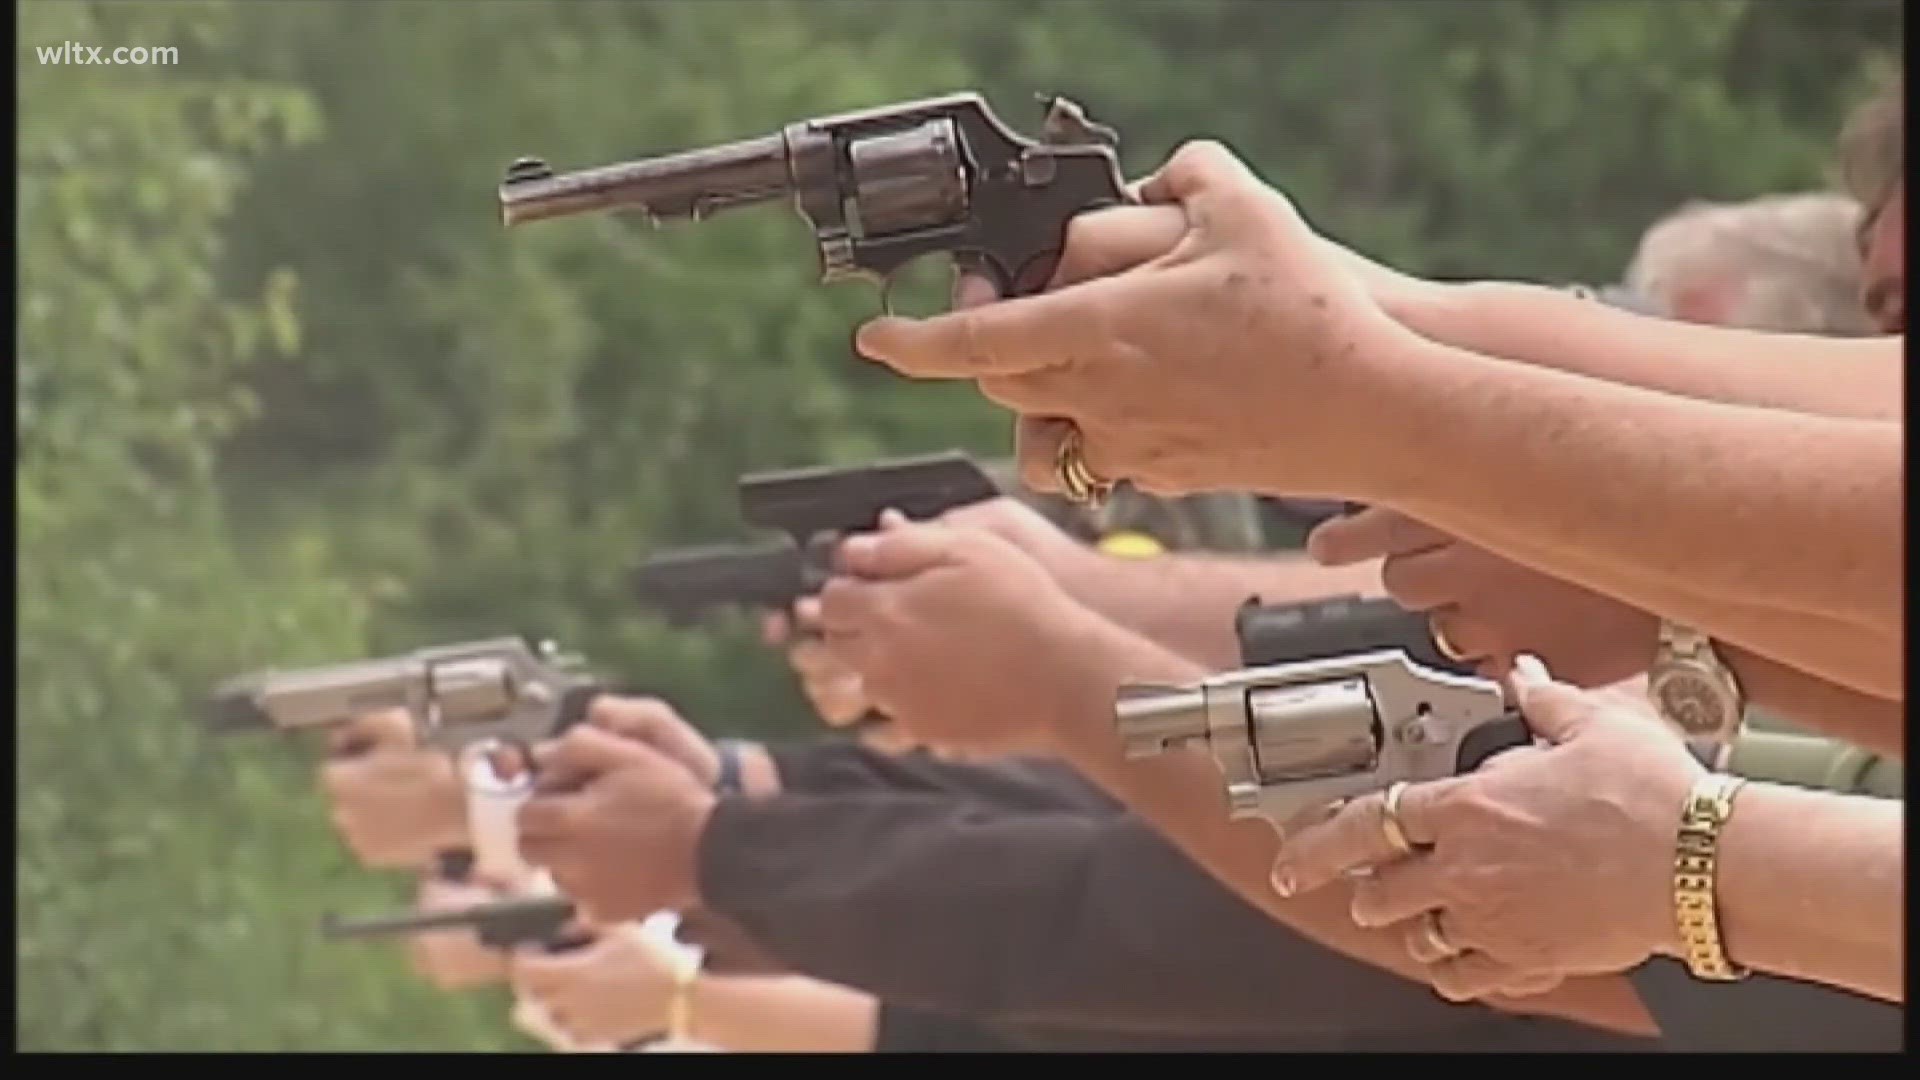 Soon carrying a handgun publicly may  soon be available without a concealed weapons permit or training.